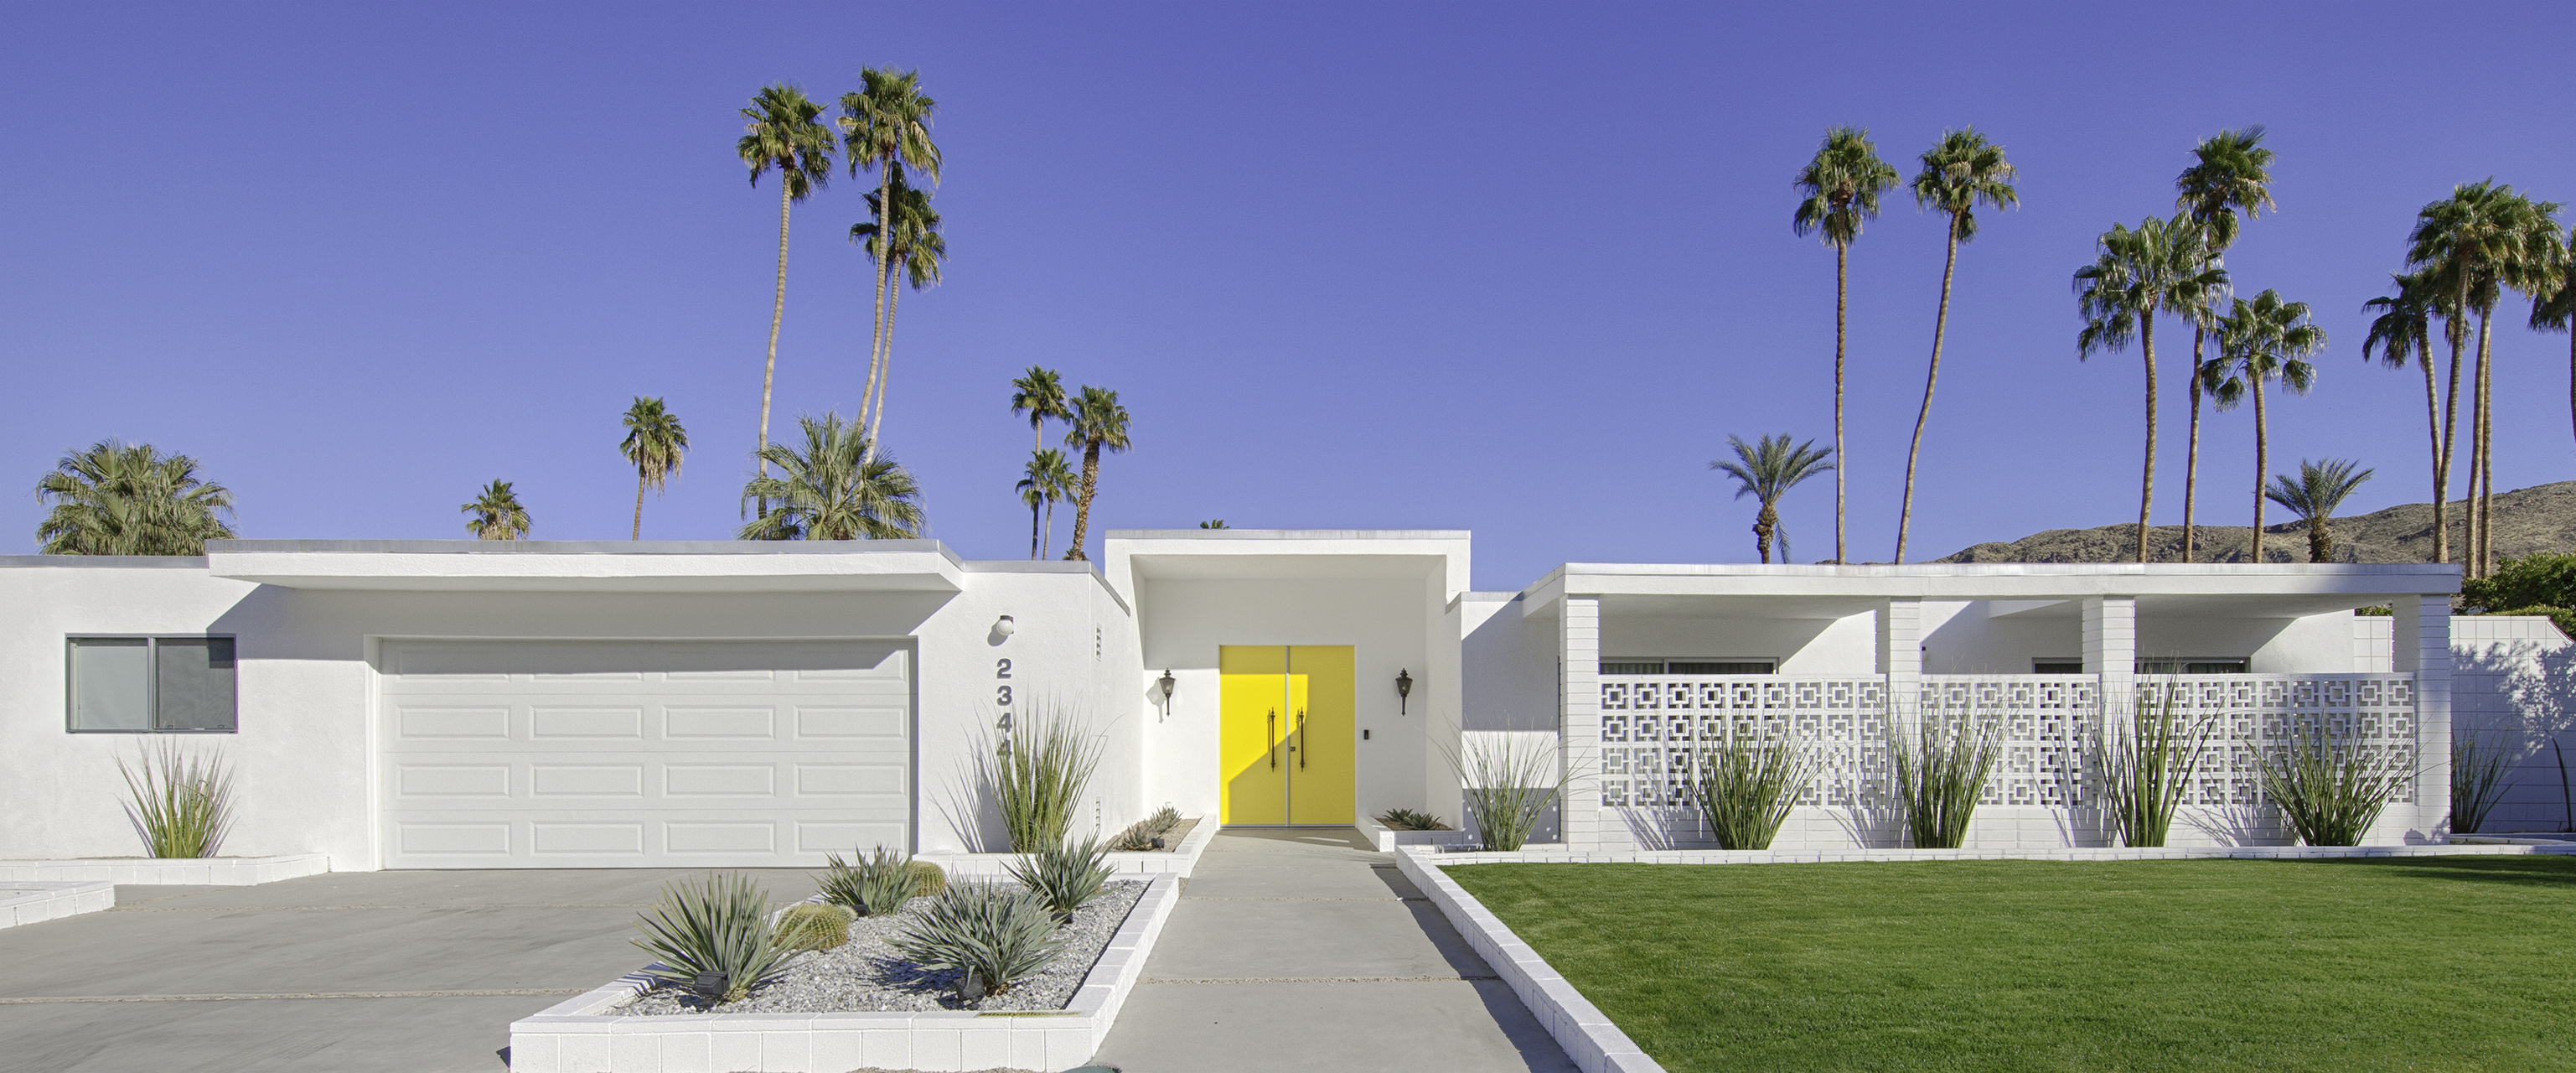 fun in palm springs, palm springs real estate, coachella valley real estate